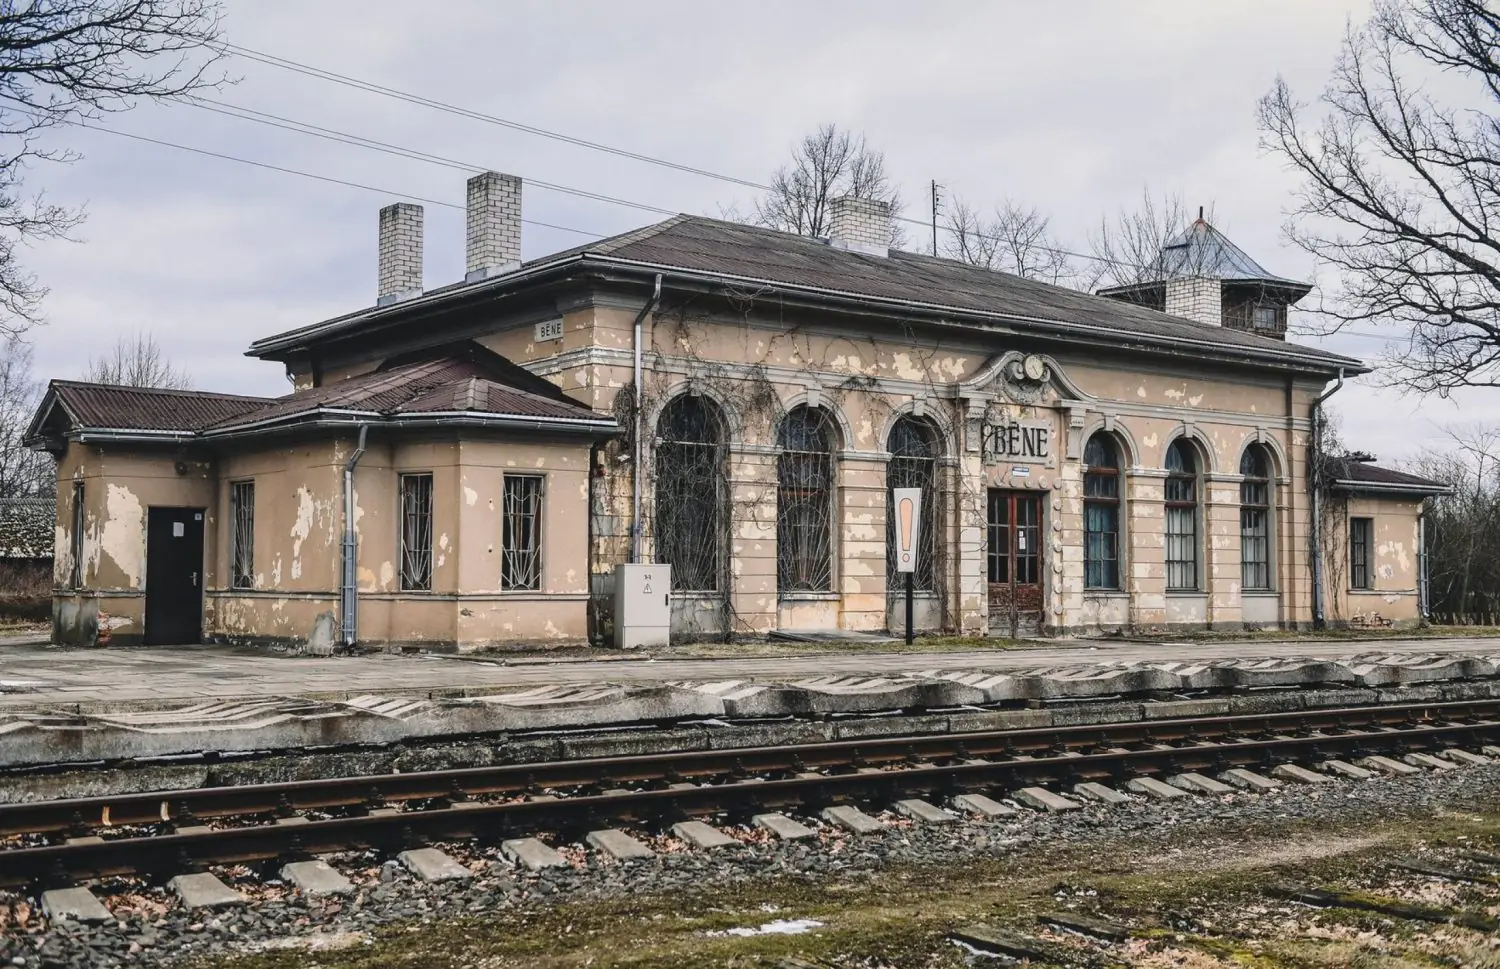 Revisiting Industrial Heritage: Railways Stations